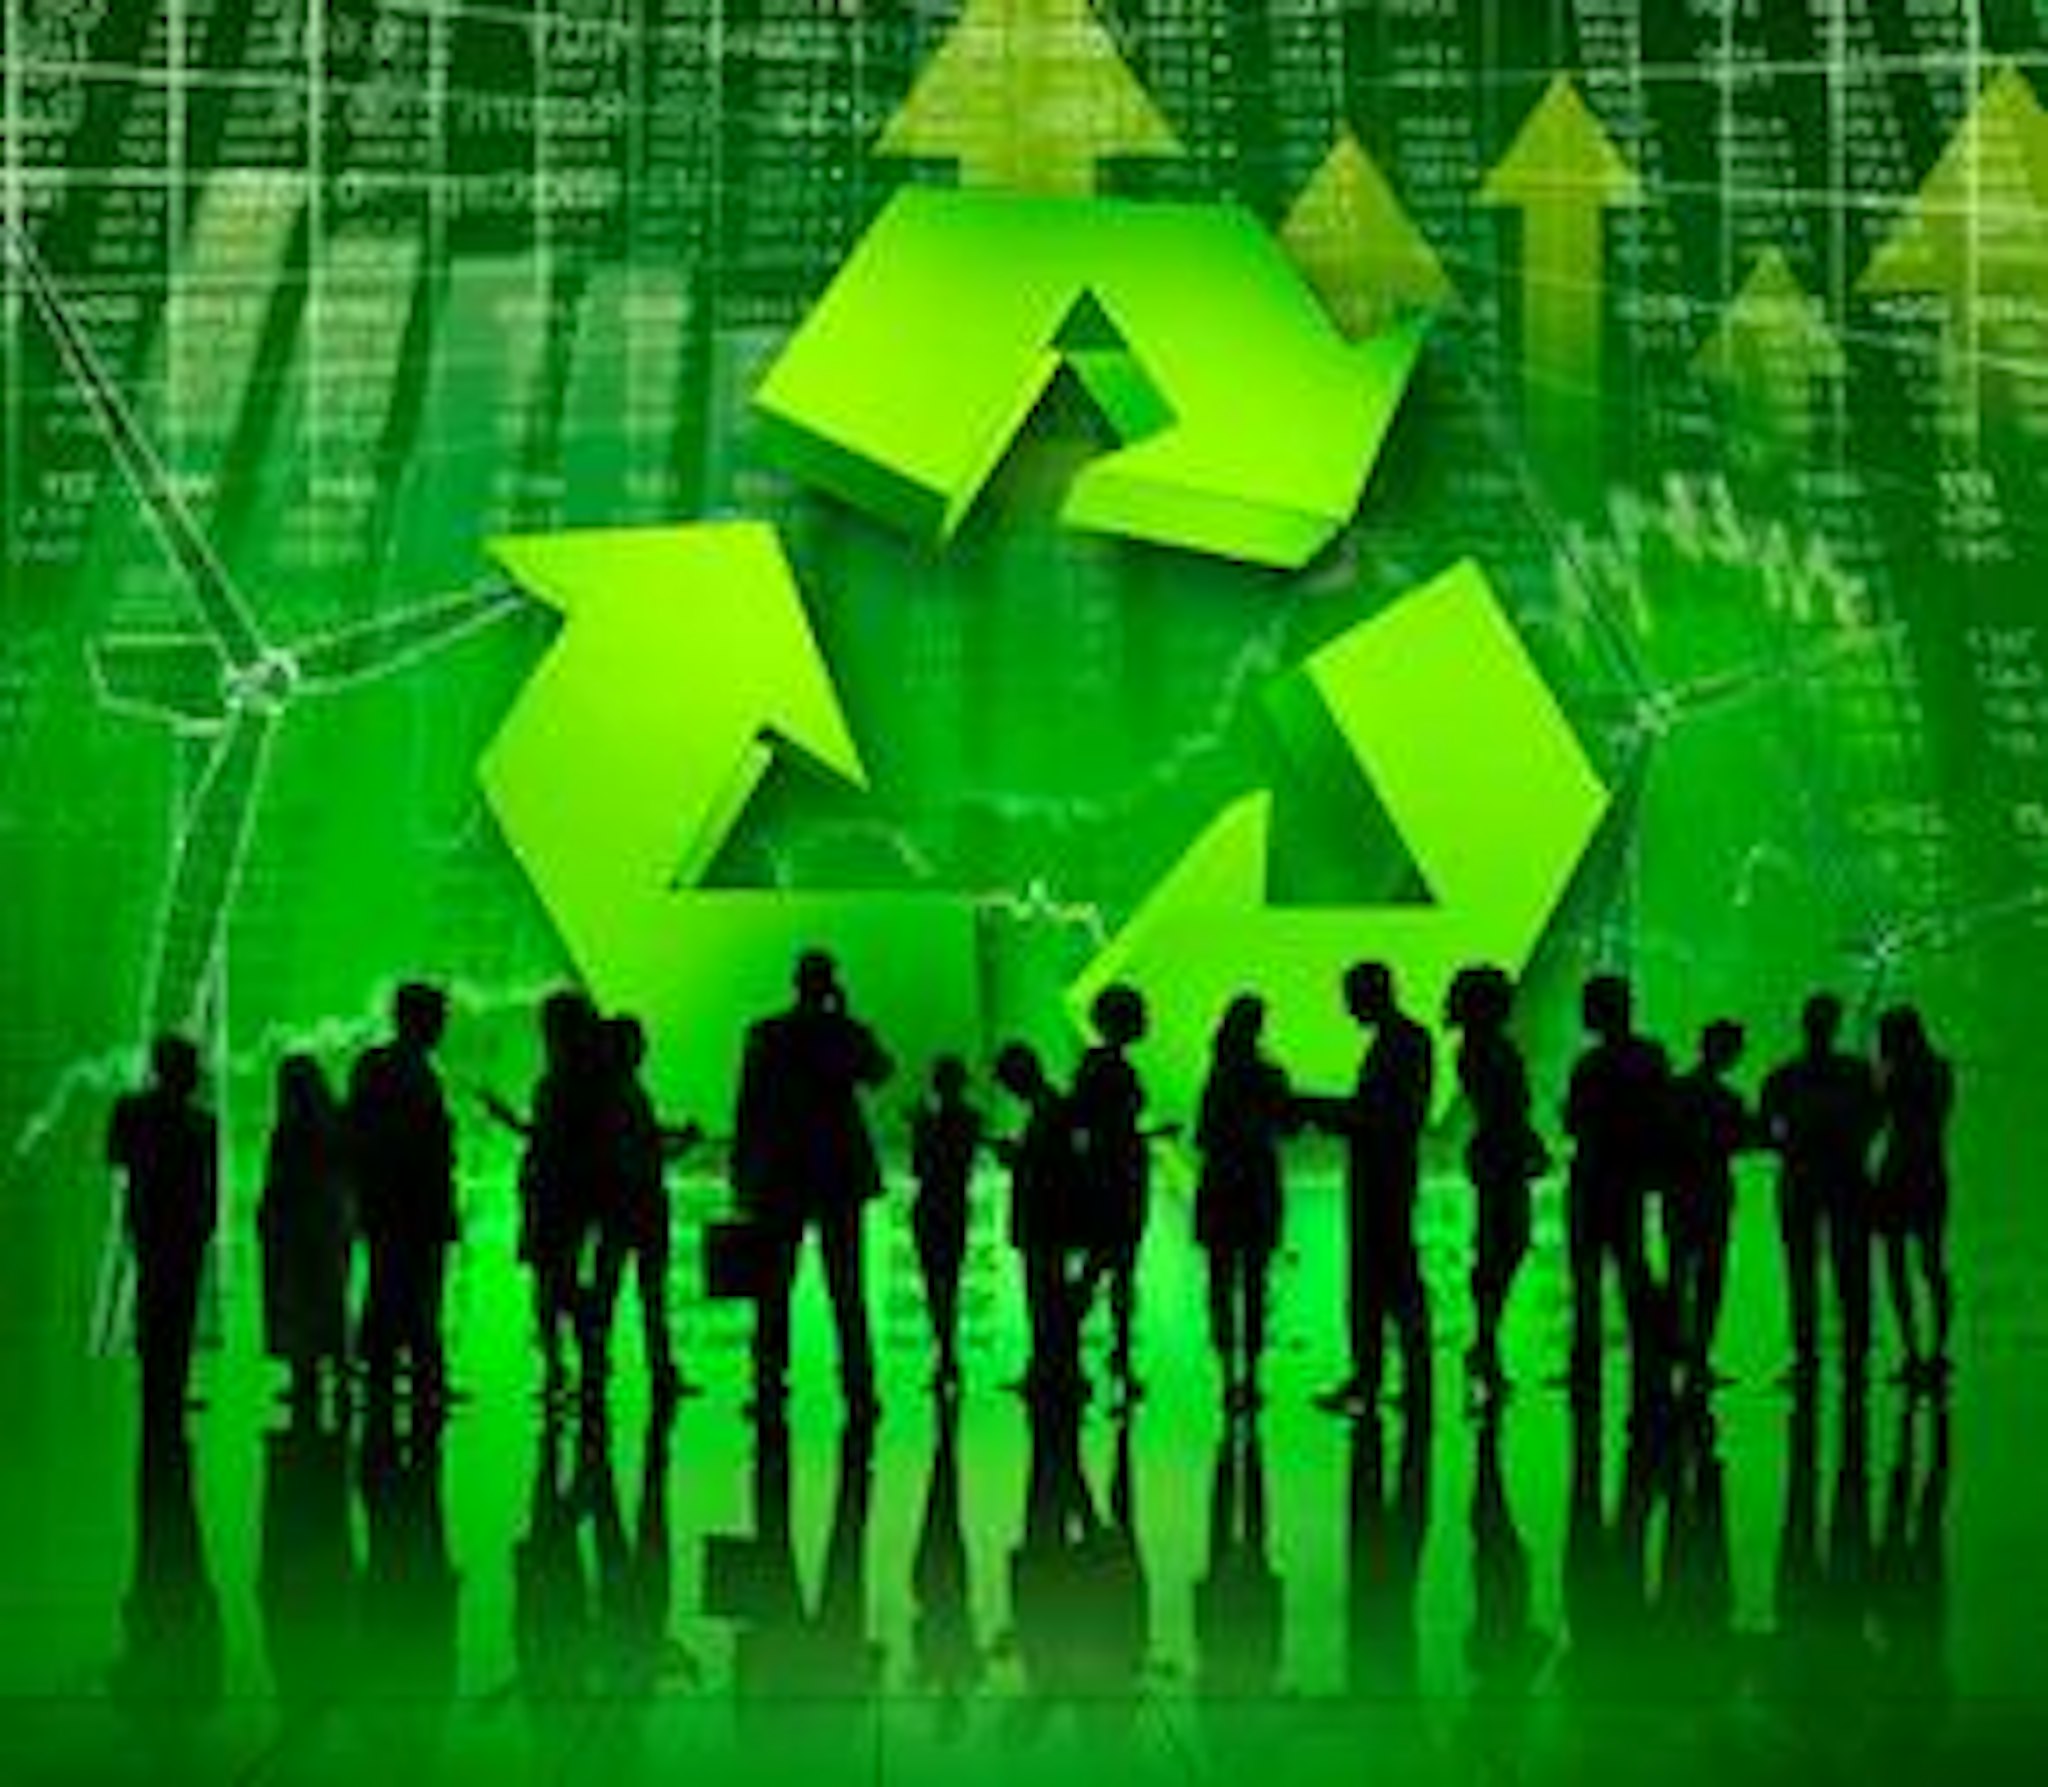 Abstract image with recycling symbol and people to showcase the relationship between social responsibility and corporate governance